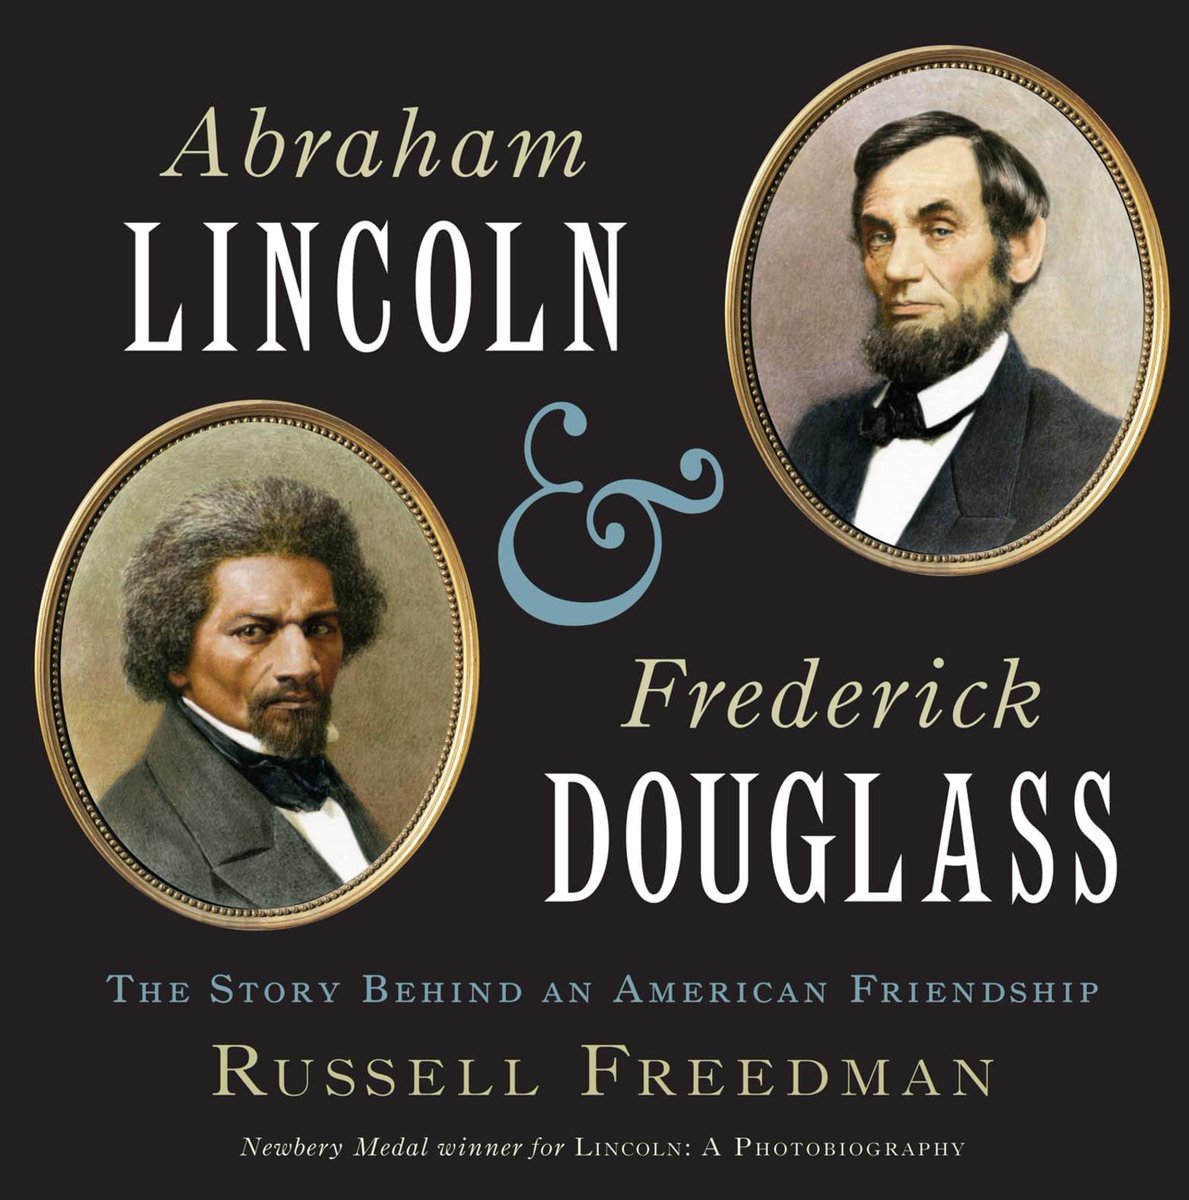 Abraham Lincoln And Frederick Douglass: The Story Behind an American Friendship JRVQZE9

https://t.co/17Mq2M9wCp https://t.co/83cx2uHm0J